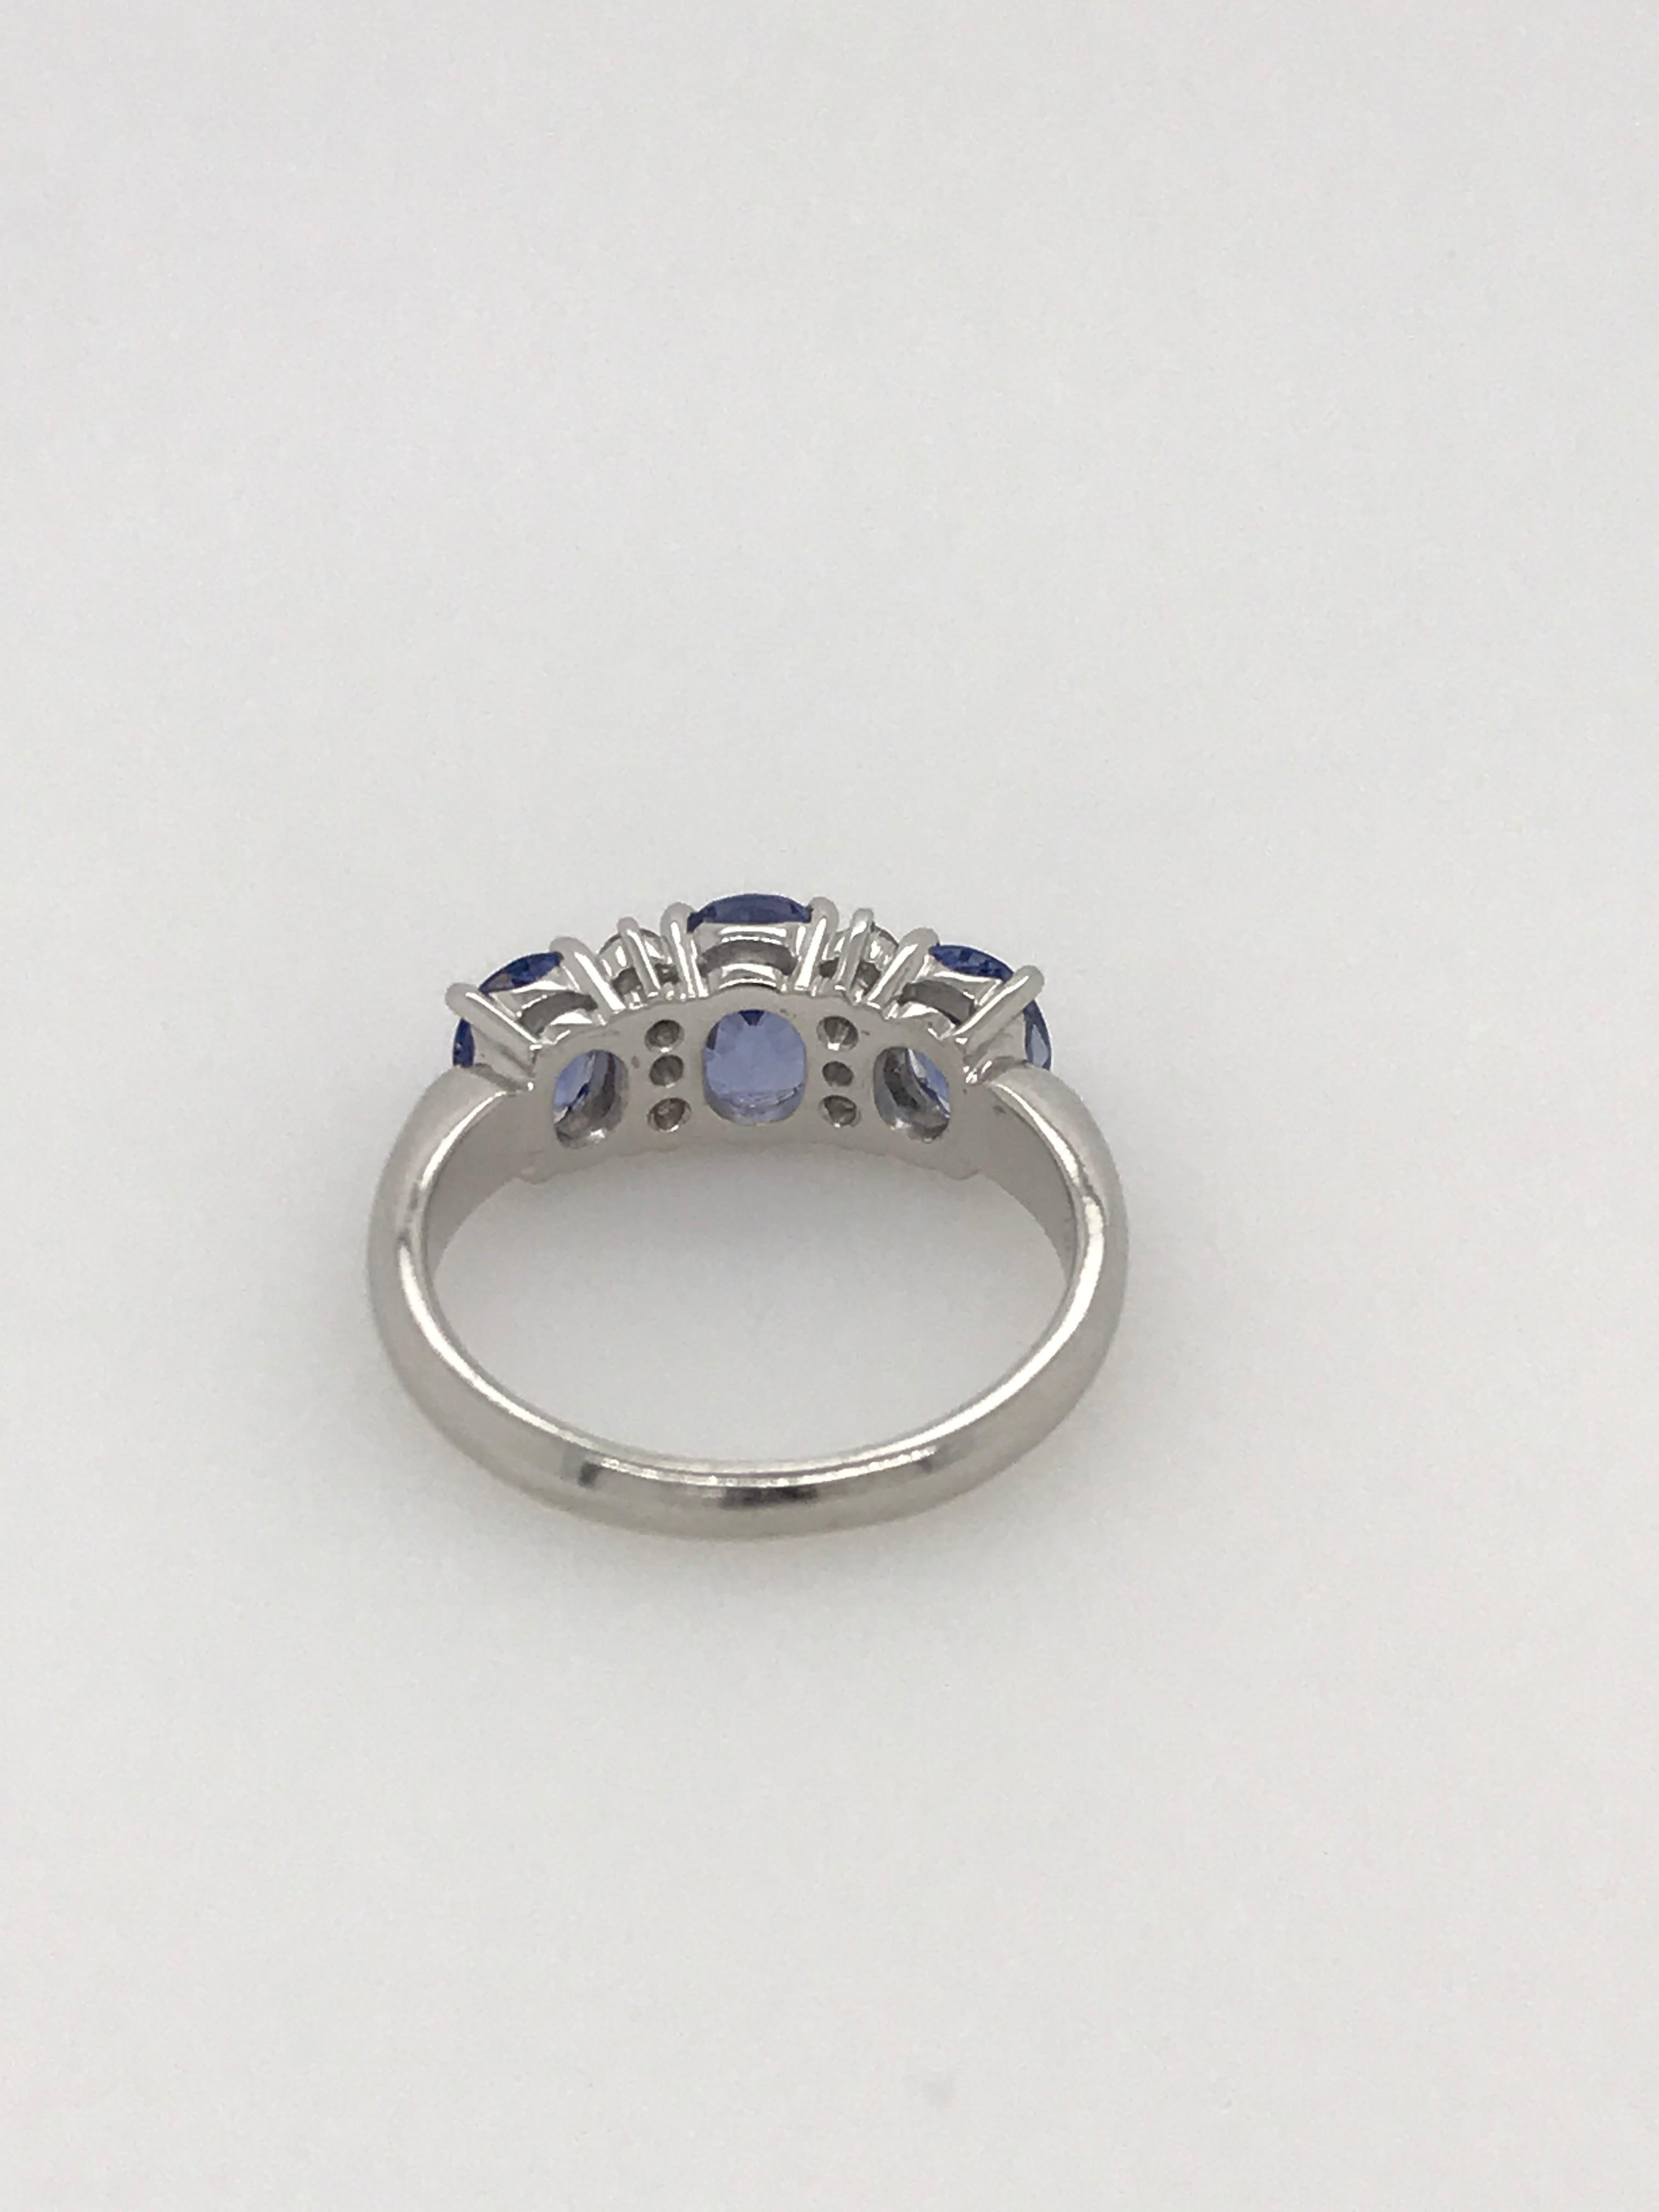 This beautiful ring has 3 matching oval Ceylon sapphires and 6 brilliant cut diamonds set in 18ct White Gold 
The 3 sapphires total 2.90ct and the 6 diamonds total 0.16ct. The band is rounded and tapers from 3.3mm at the shoulder to 2.3mm.
Ring size